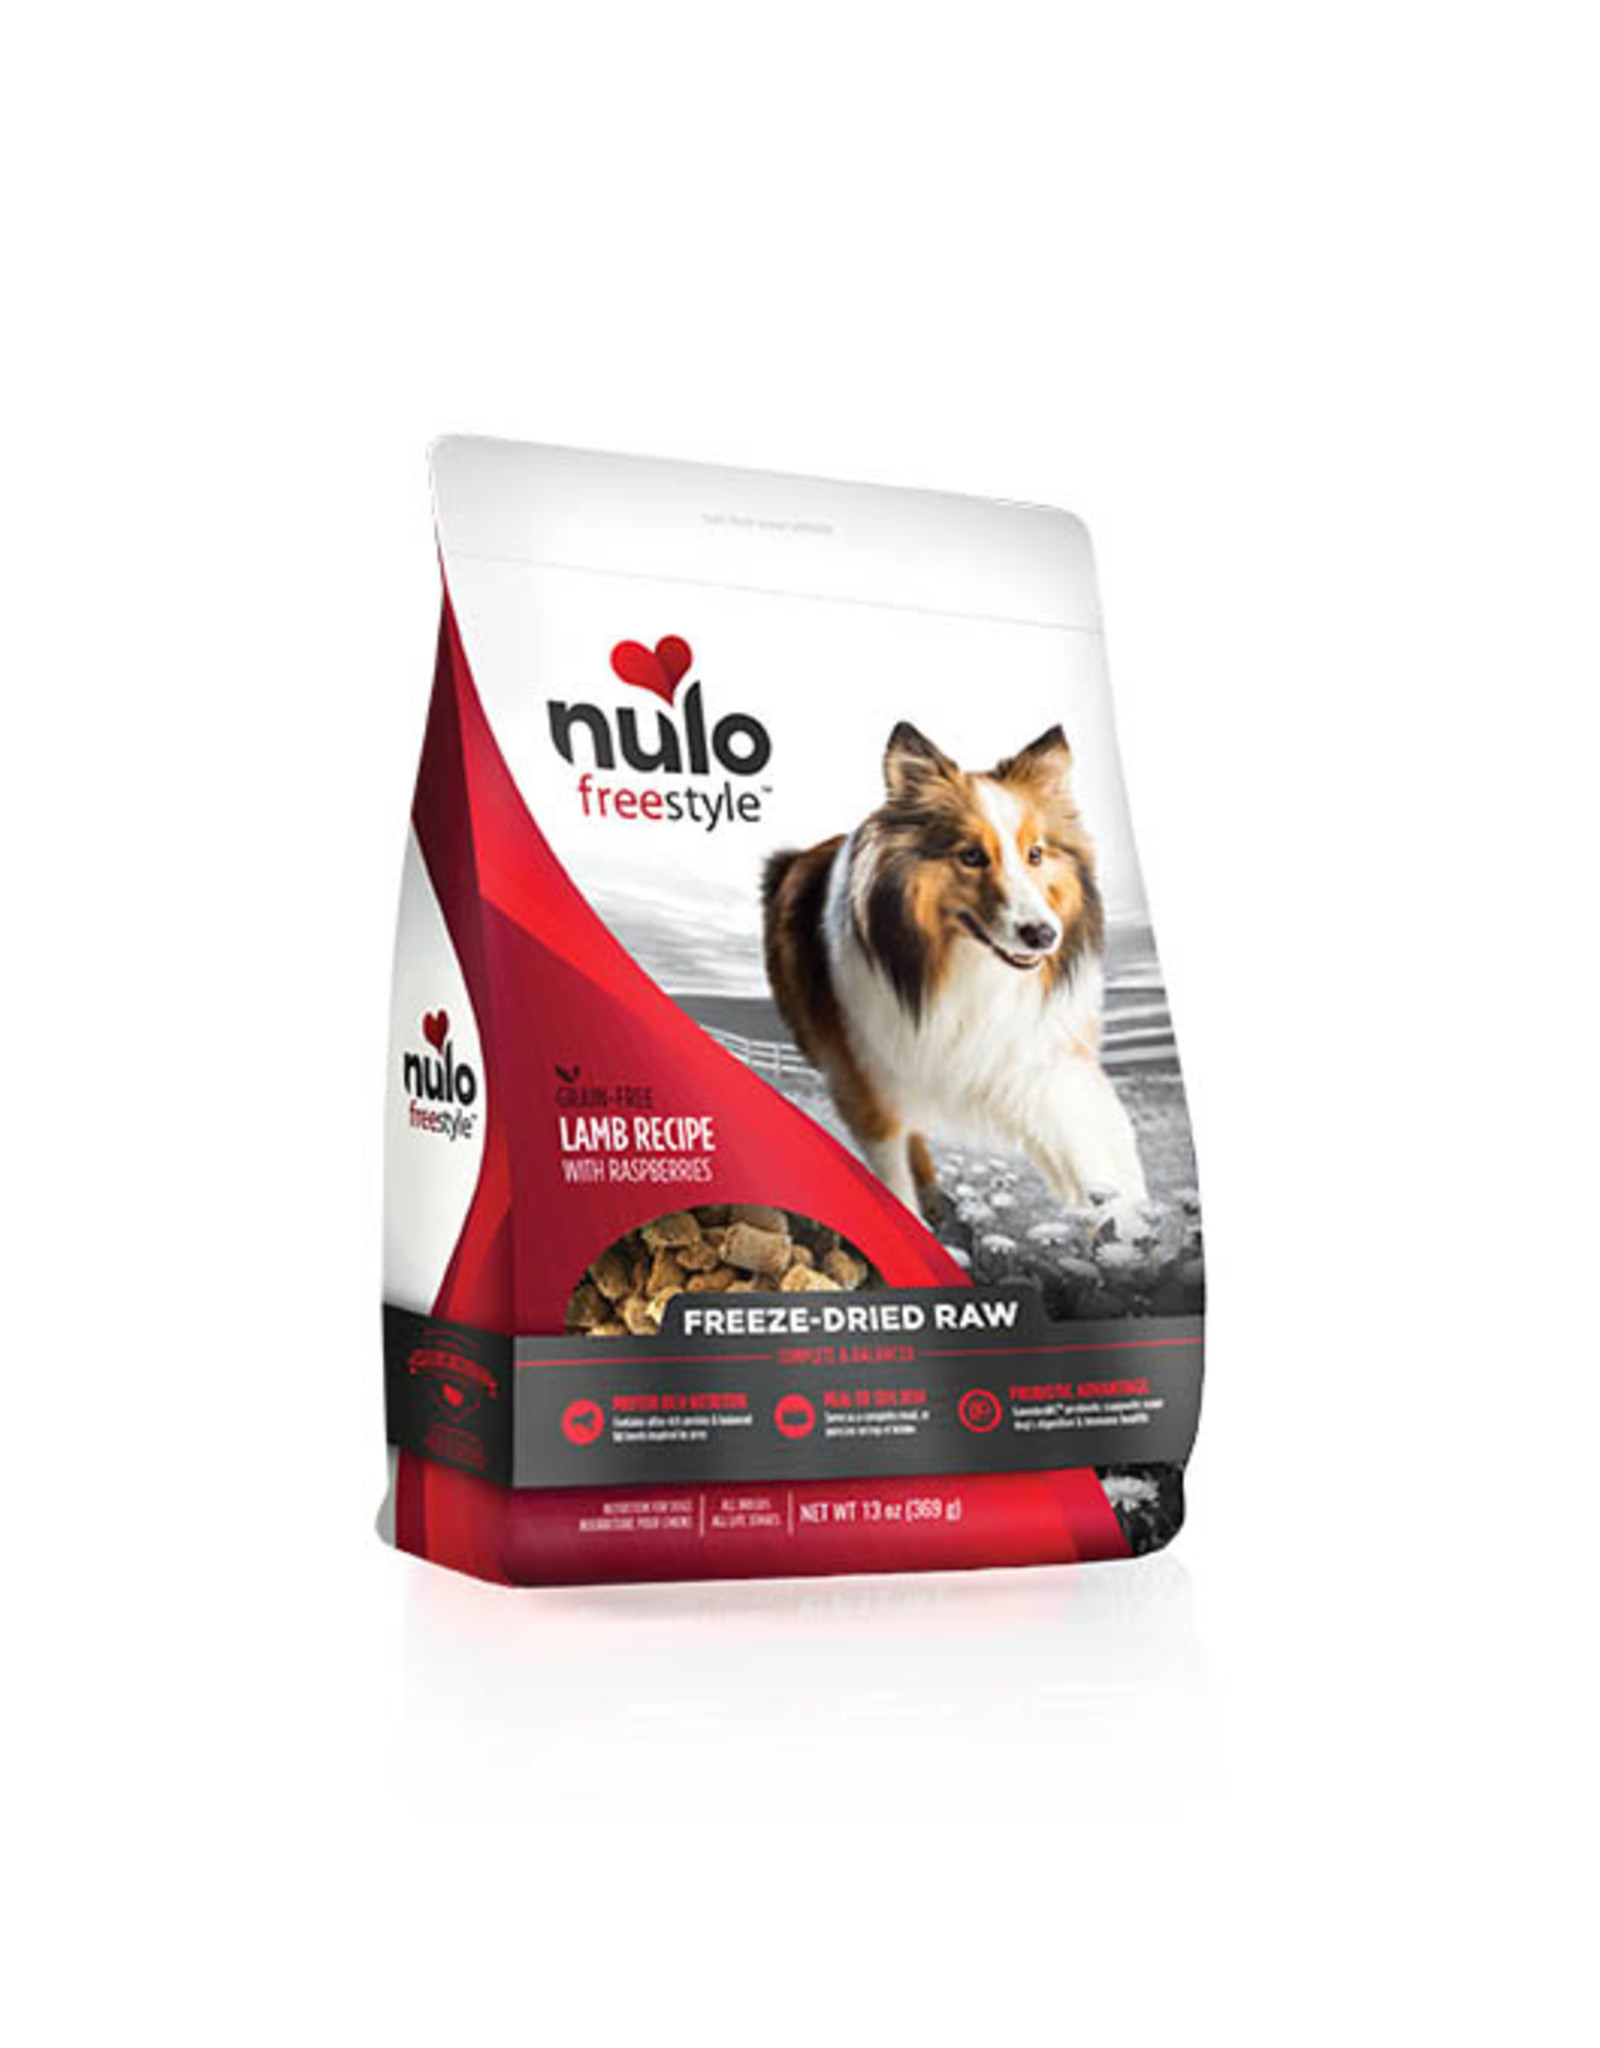 Nulo FreeStyle - Puppy & Adult - FD Lamb Recipe with Raspberries 13oz